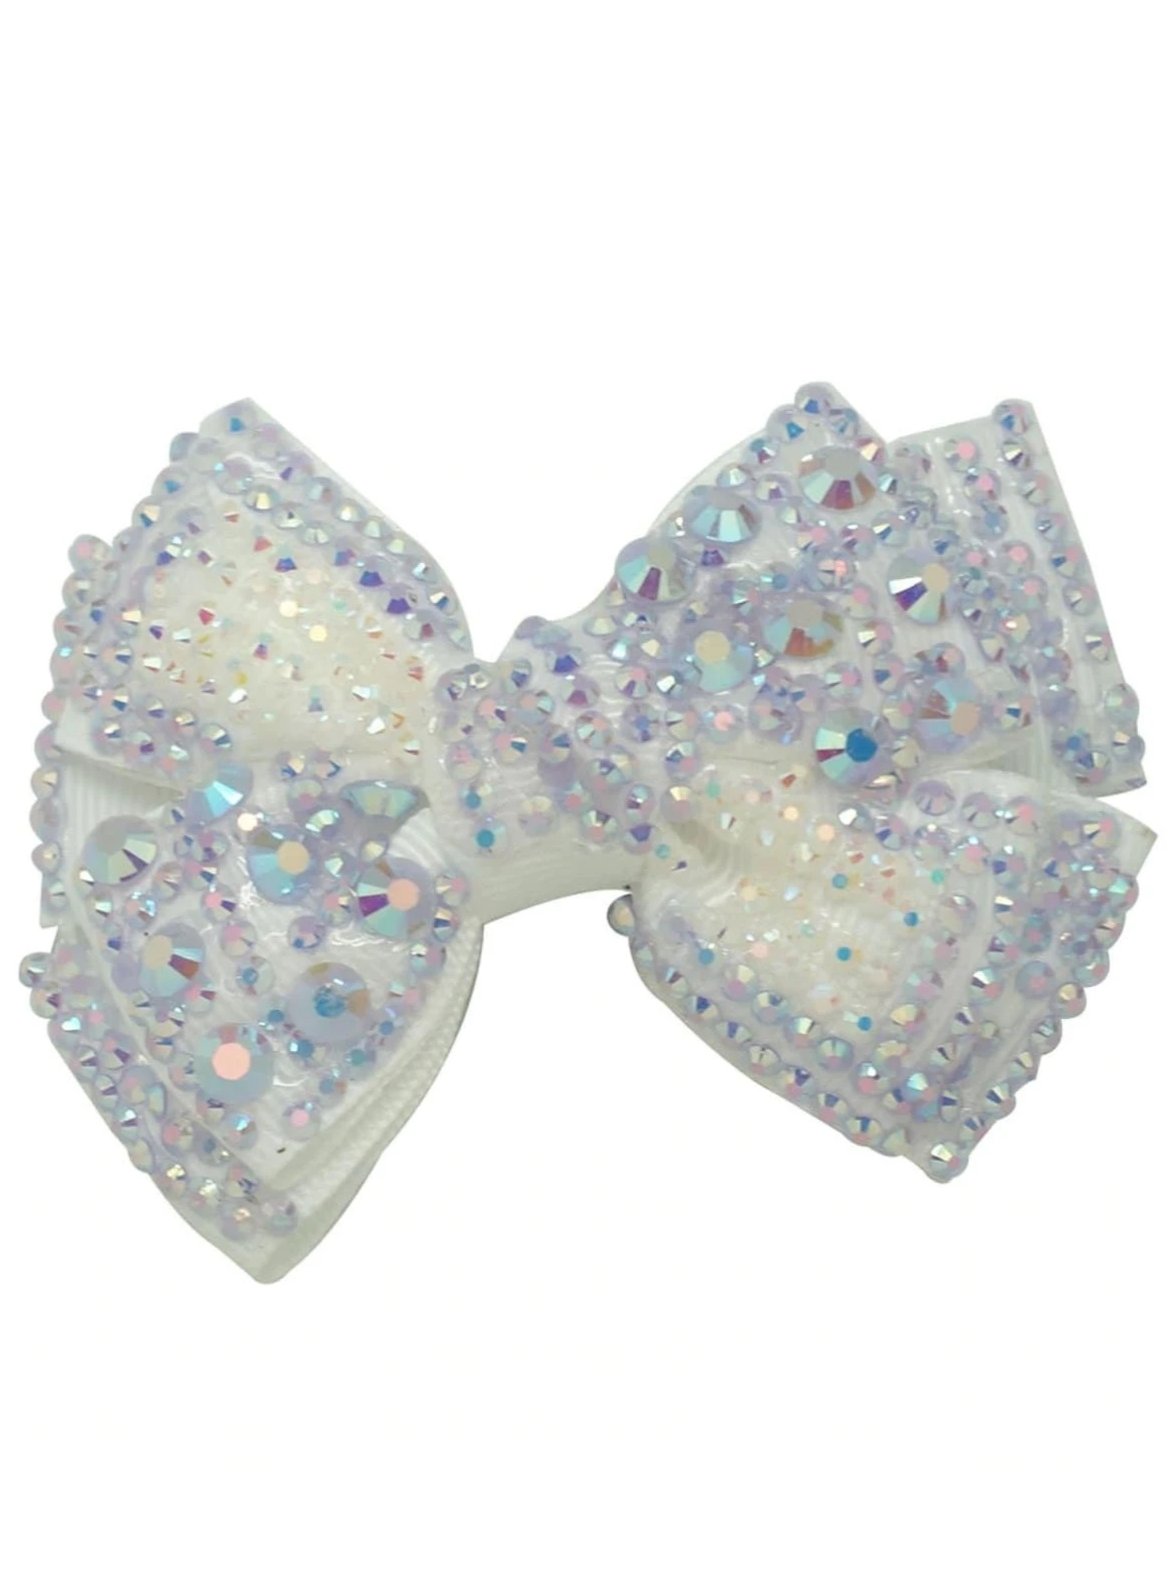 Girls Crystal Rhinestone Embellished Bow Hair Clips - Silver - Hair Accessories